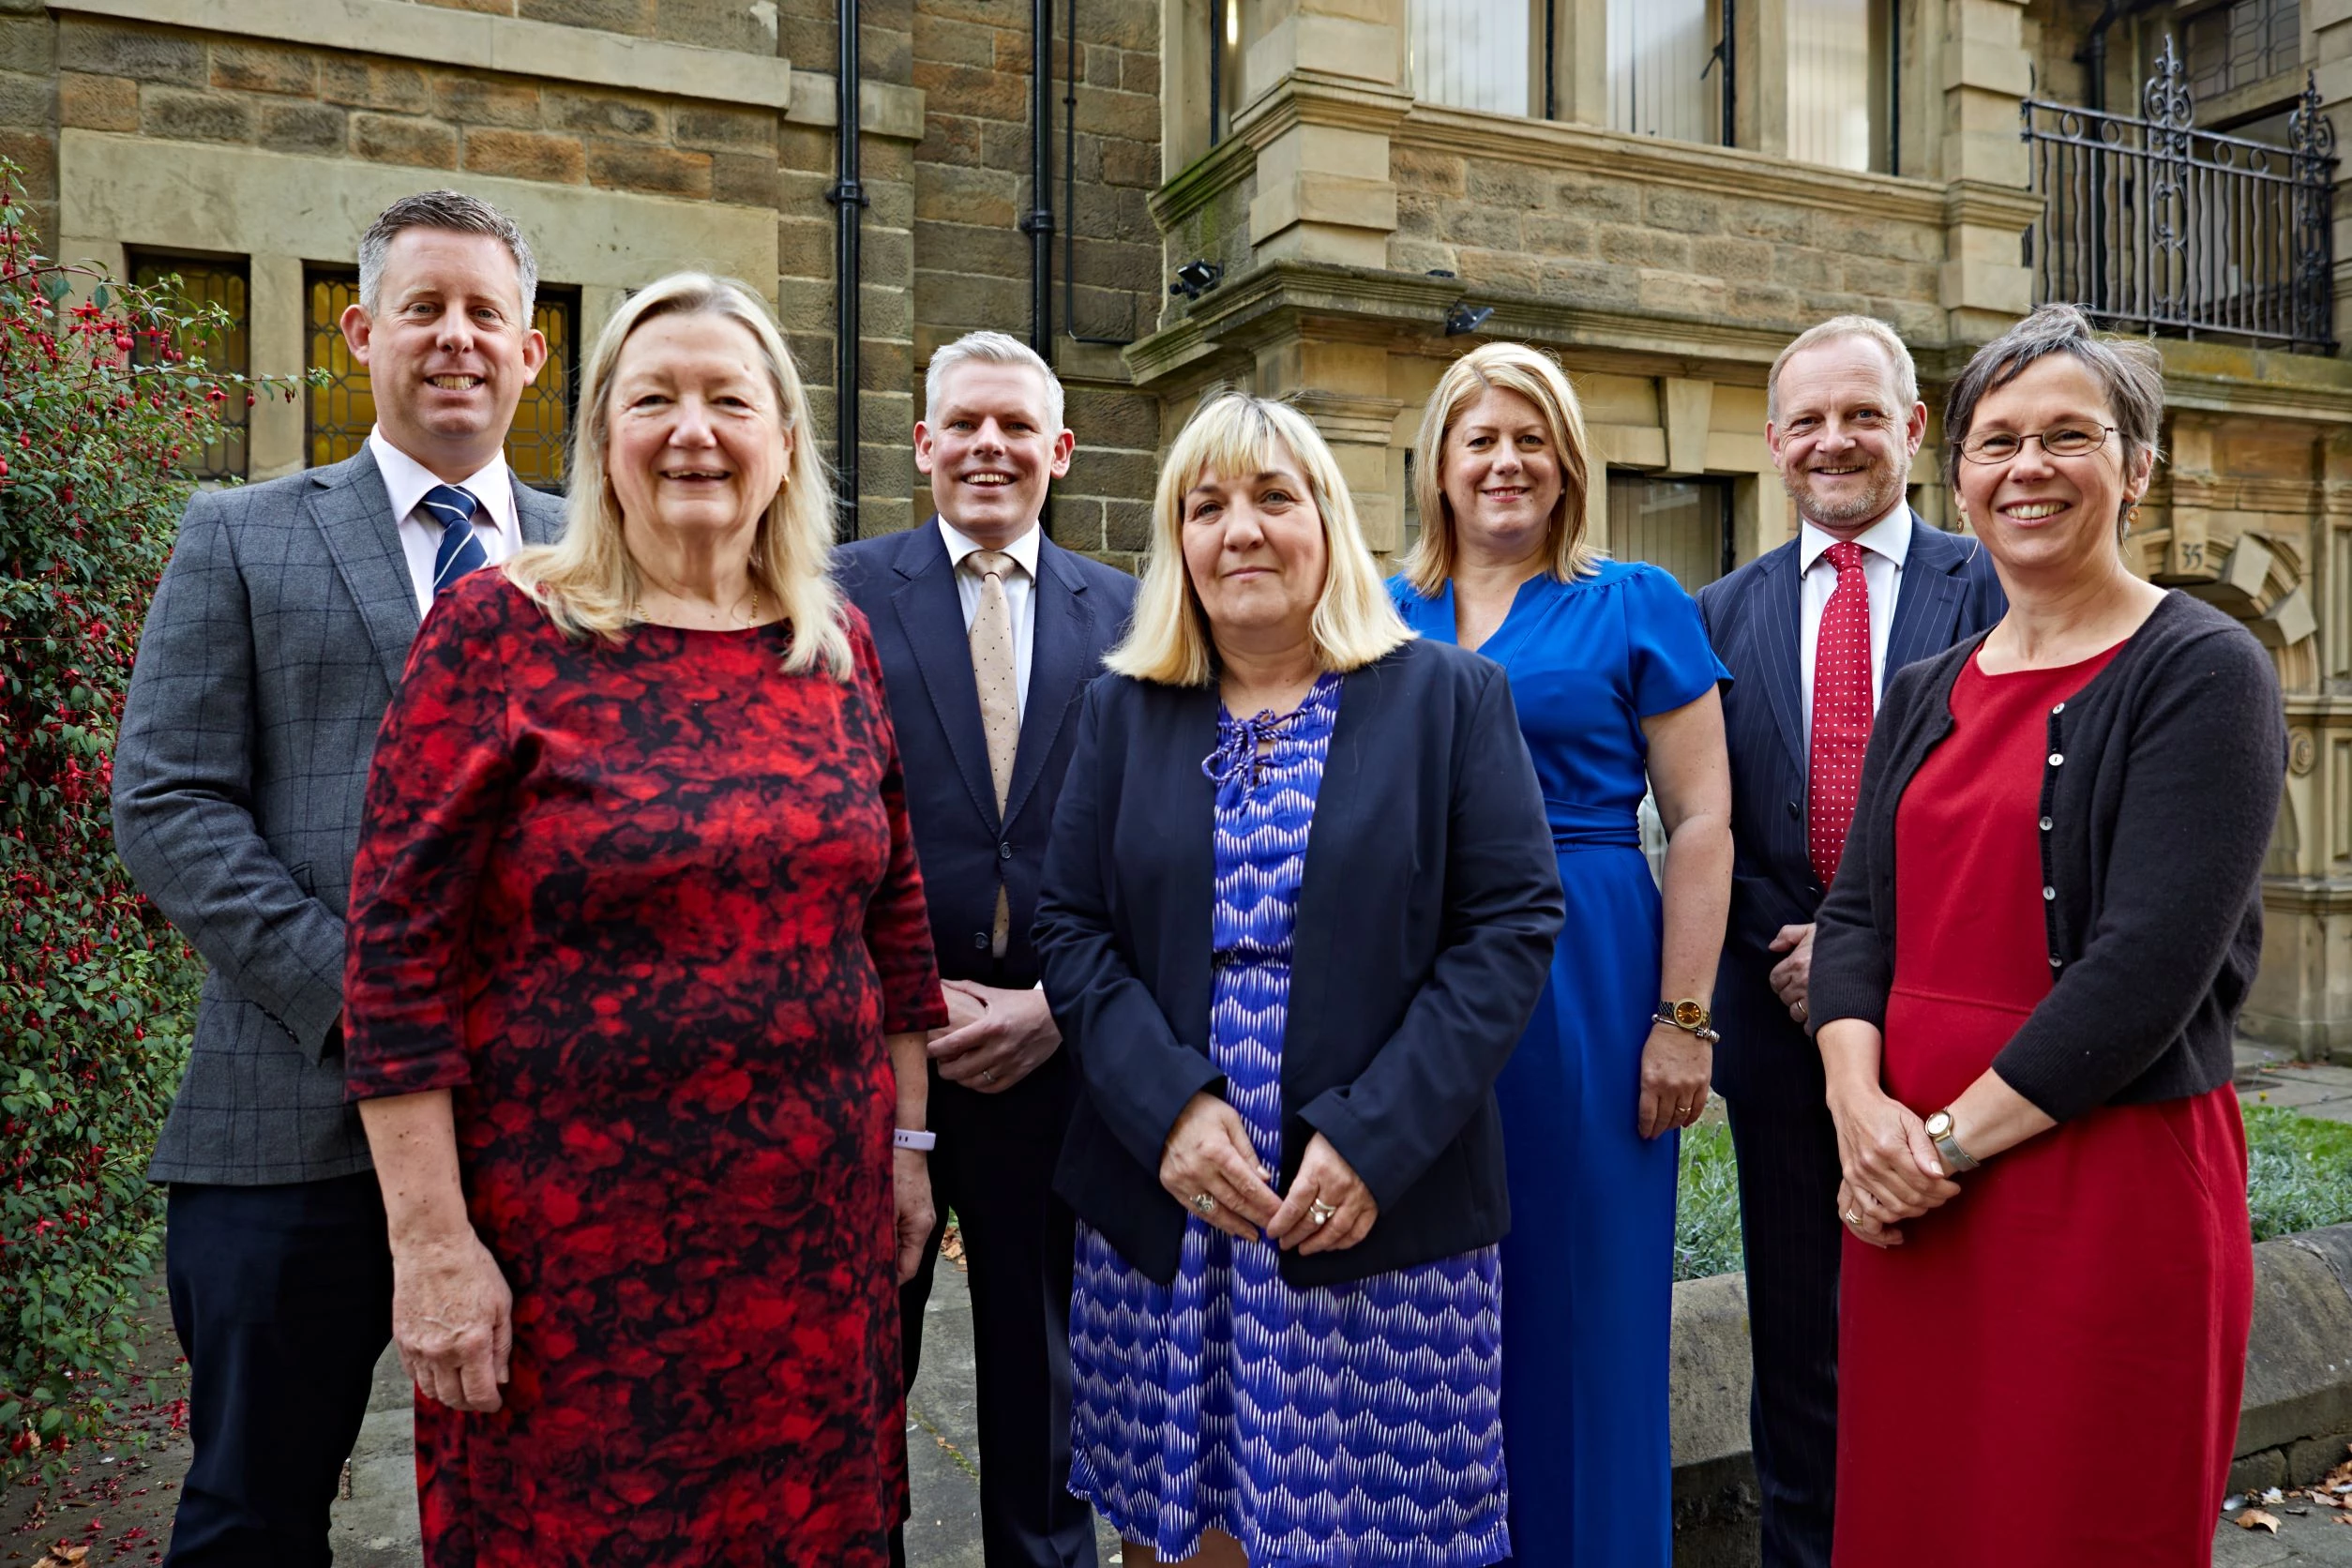 Picture shows (L to R): The Ridley and Hall team comprising Adam Fletcher, Jill Leece, James Cook, Jane Munden, Emma Pearmaine, Anthony Elston and Sarah Young